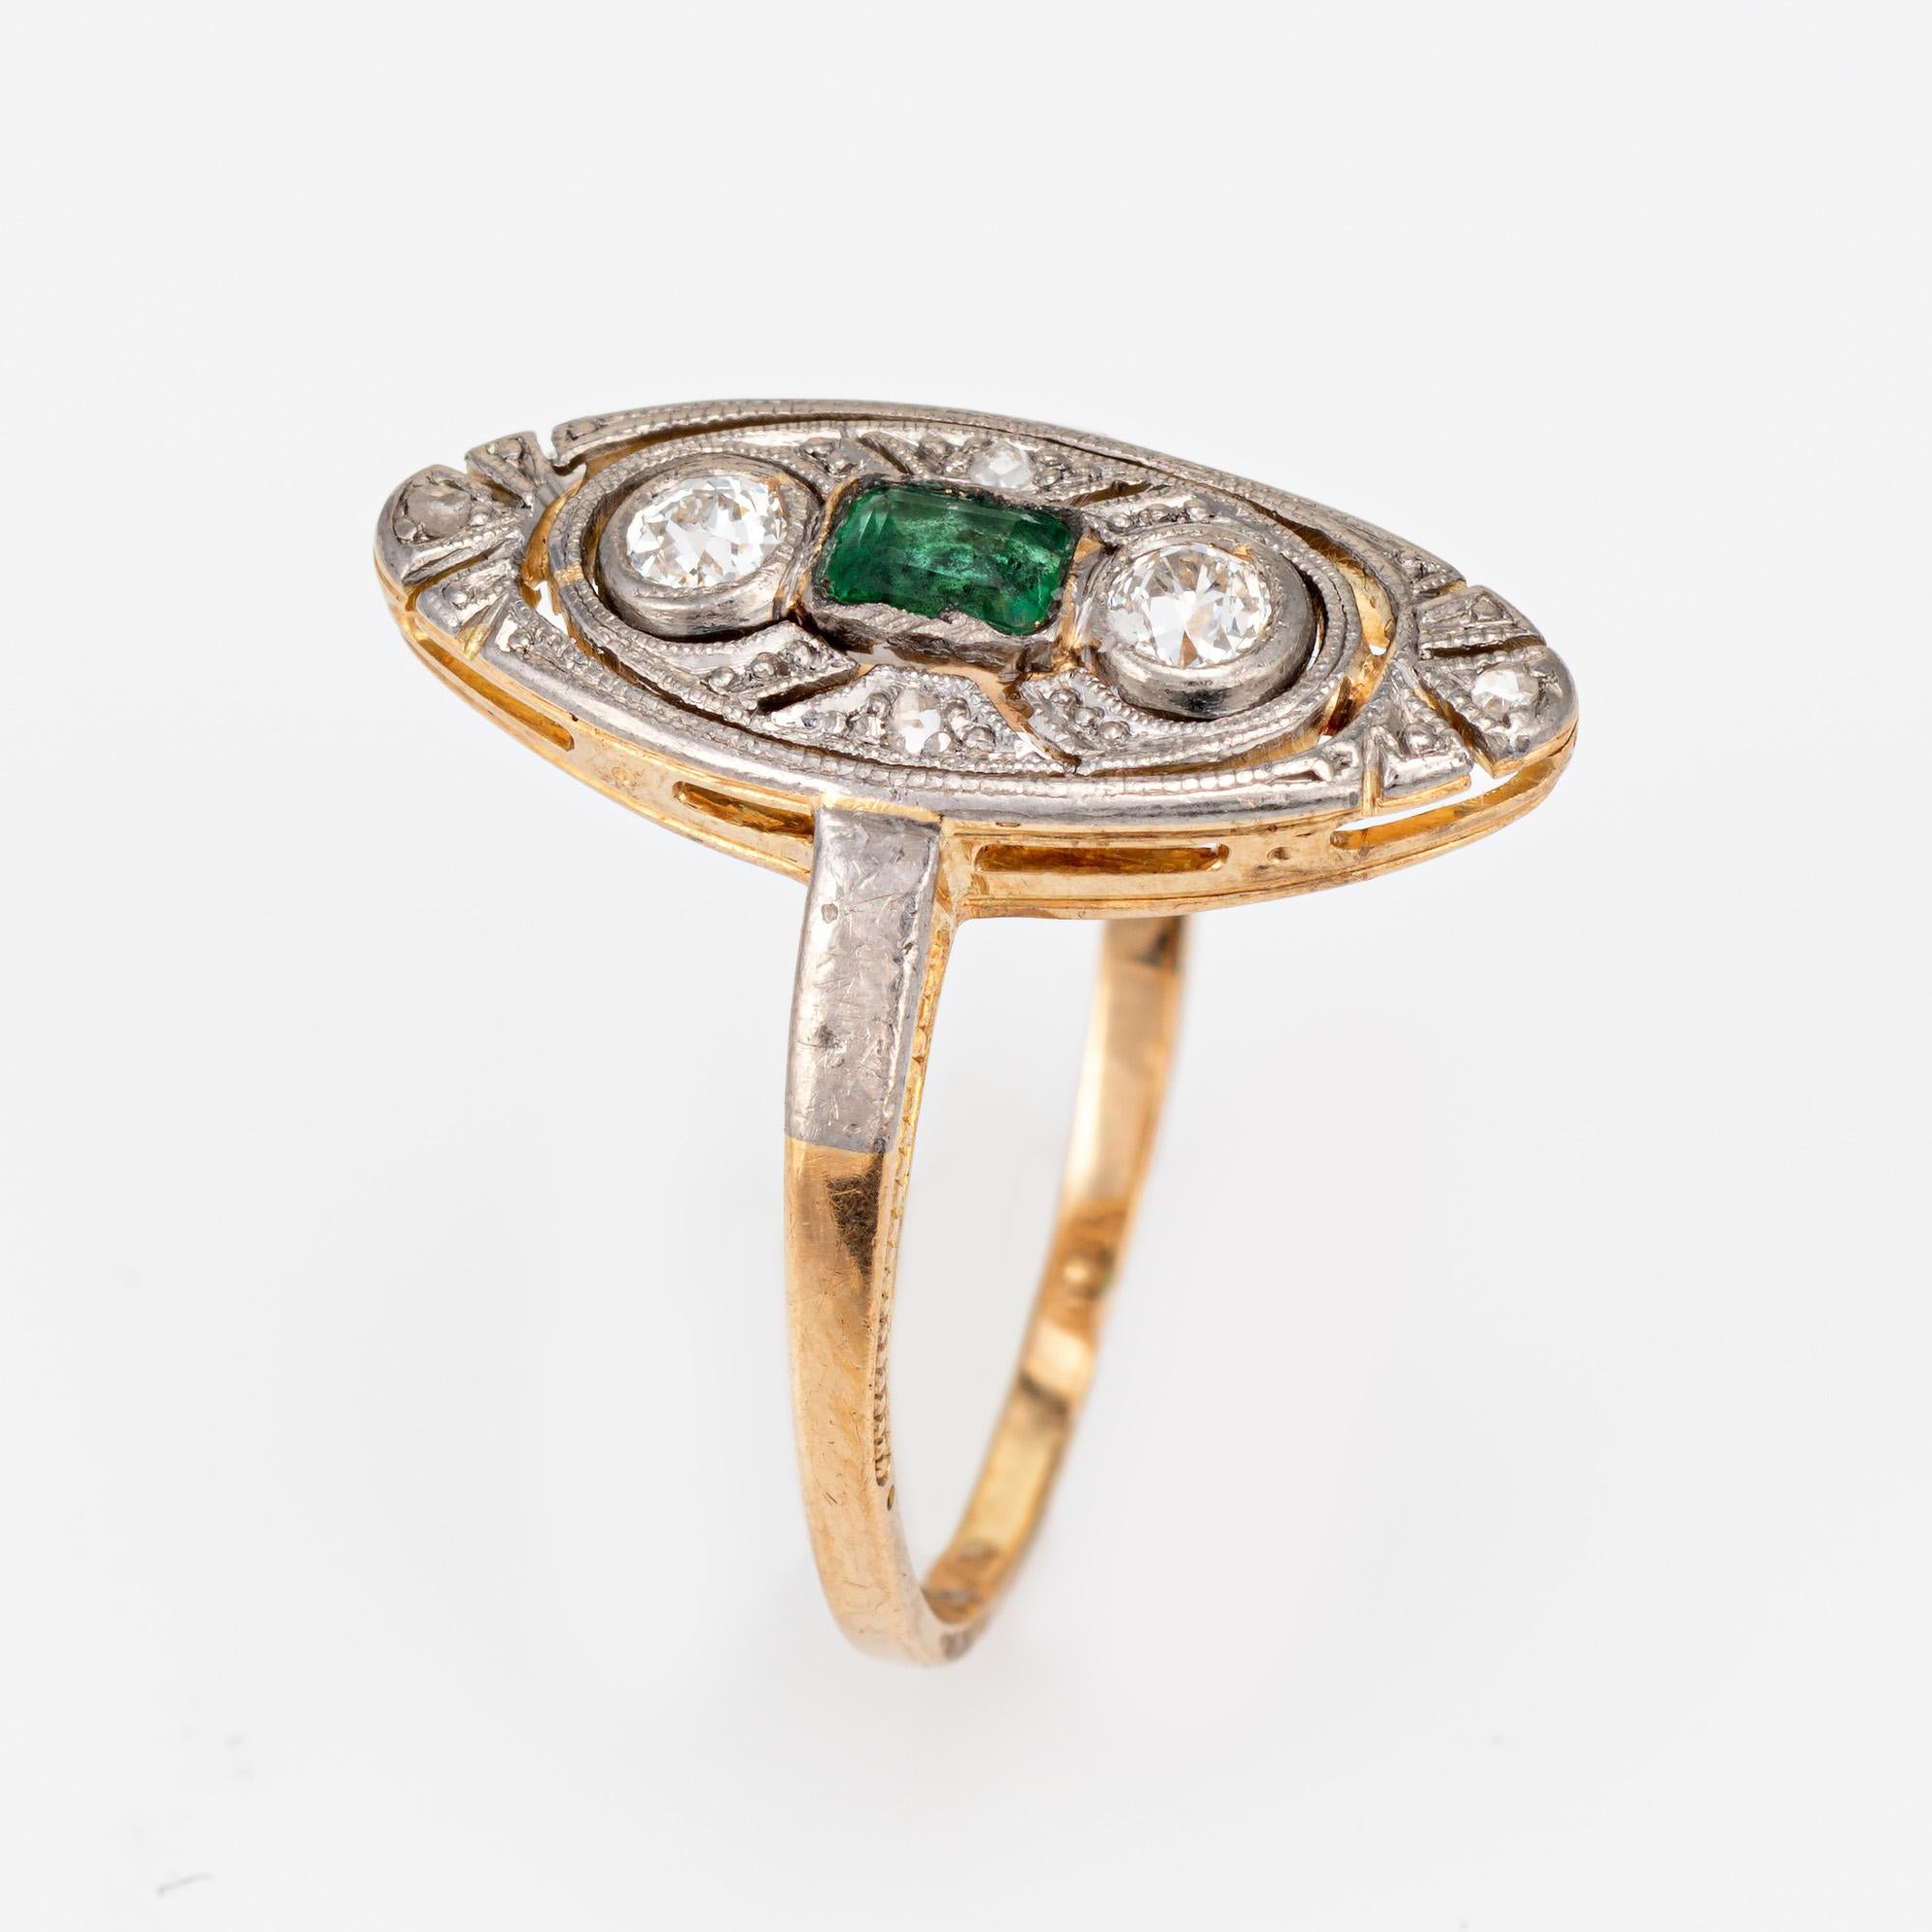 Finely detailed vintage Art Deco diamond & emerald ring (circa 1920s to 1930s) crafted in 14k yellow & white gold. 

Two center set estimated 0.10 carat old mine cut diamonds total an estimated 0.20 carats (estimated at J-K color and SI1-I1